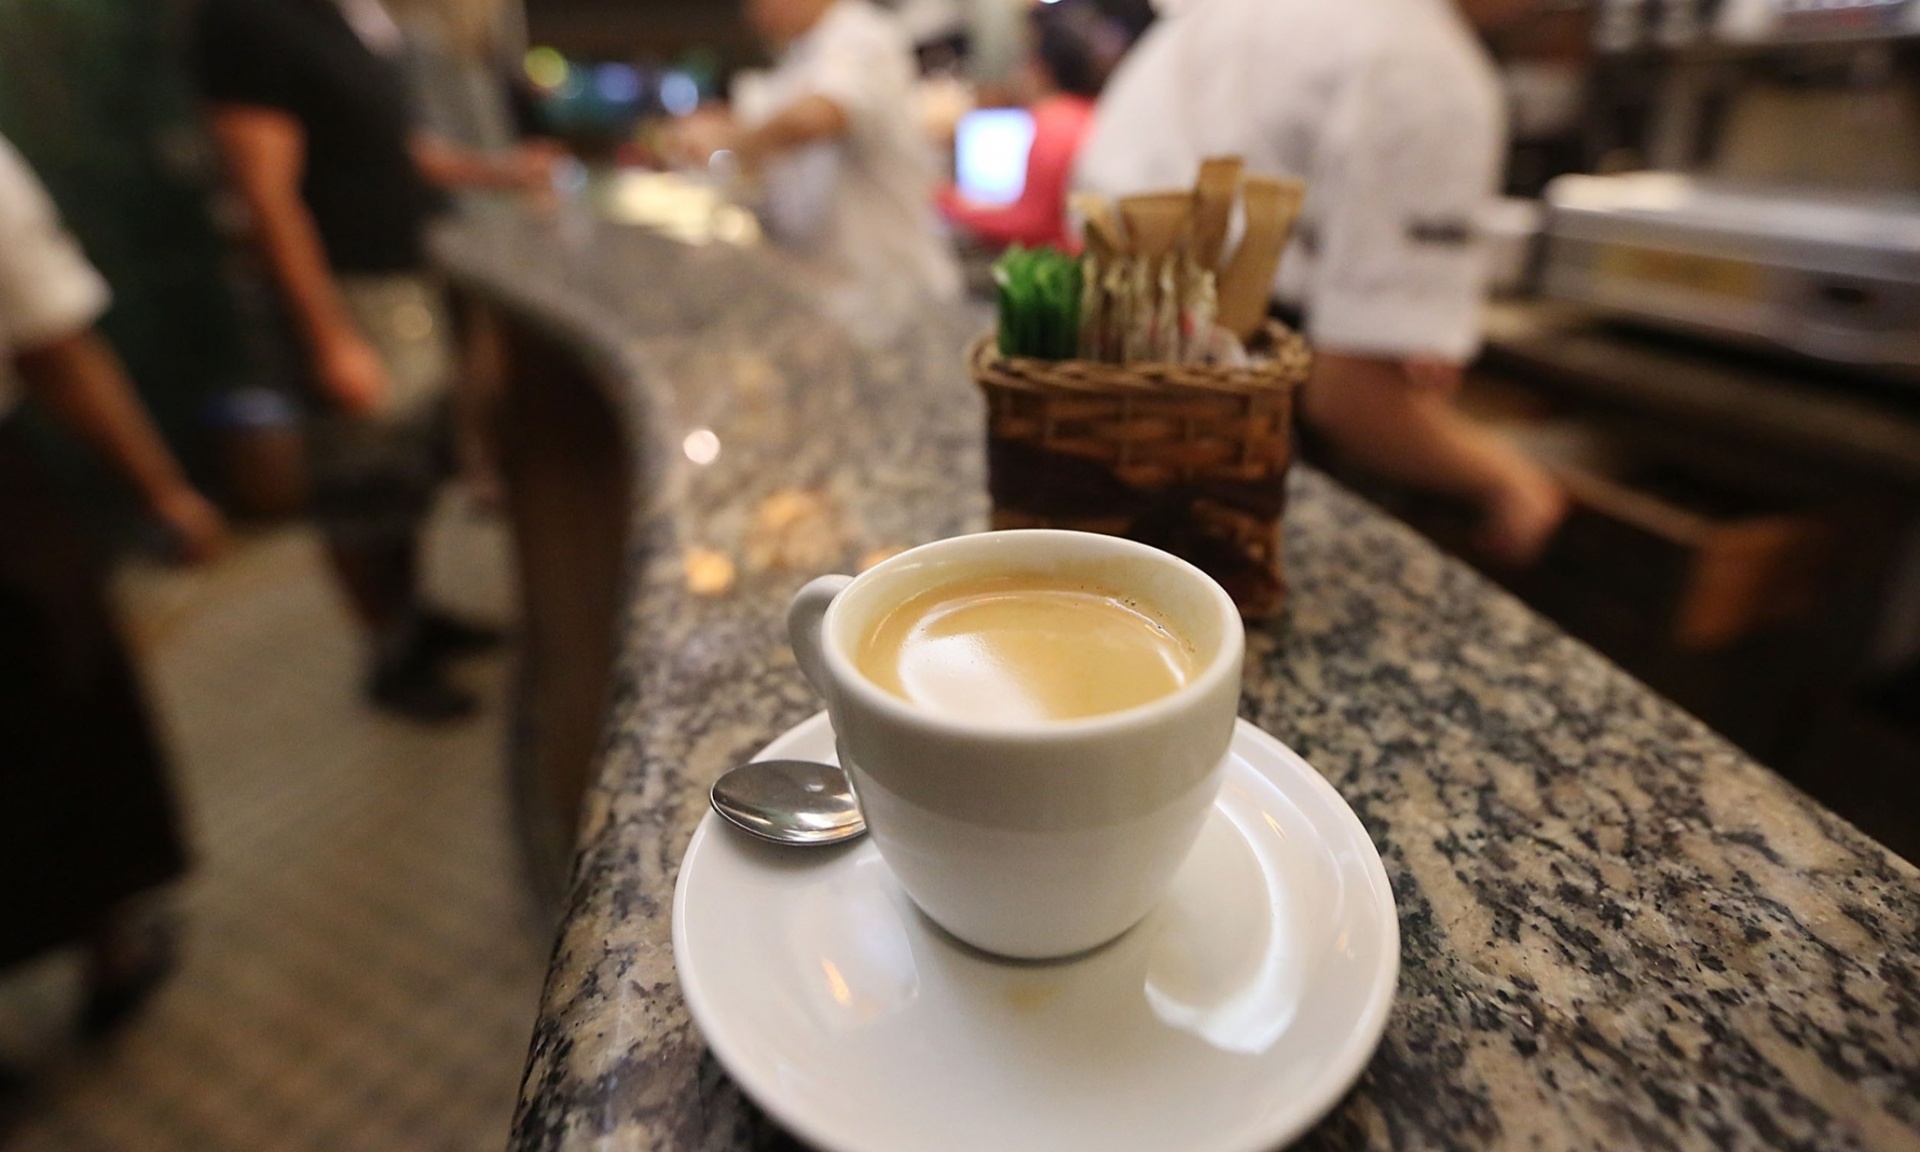 A cup of coffee made from Brazilian Arabica beans sits on the counter of a shop in Rio de Janeiro. Arabica beans account for 70% of the global coffee market. Photograph: Mario Tama/Getty Images